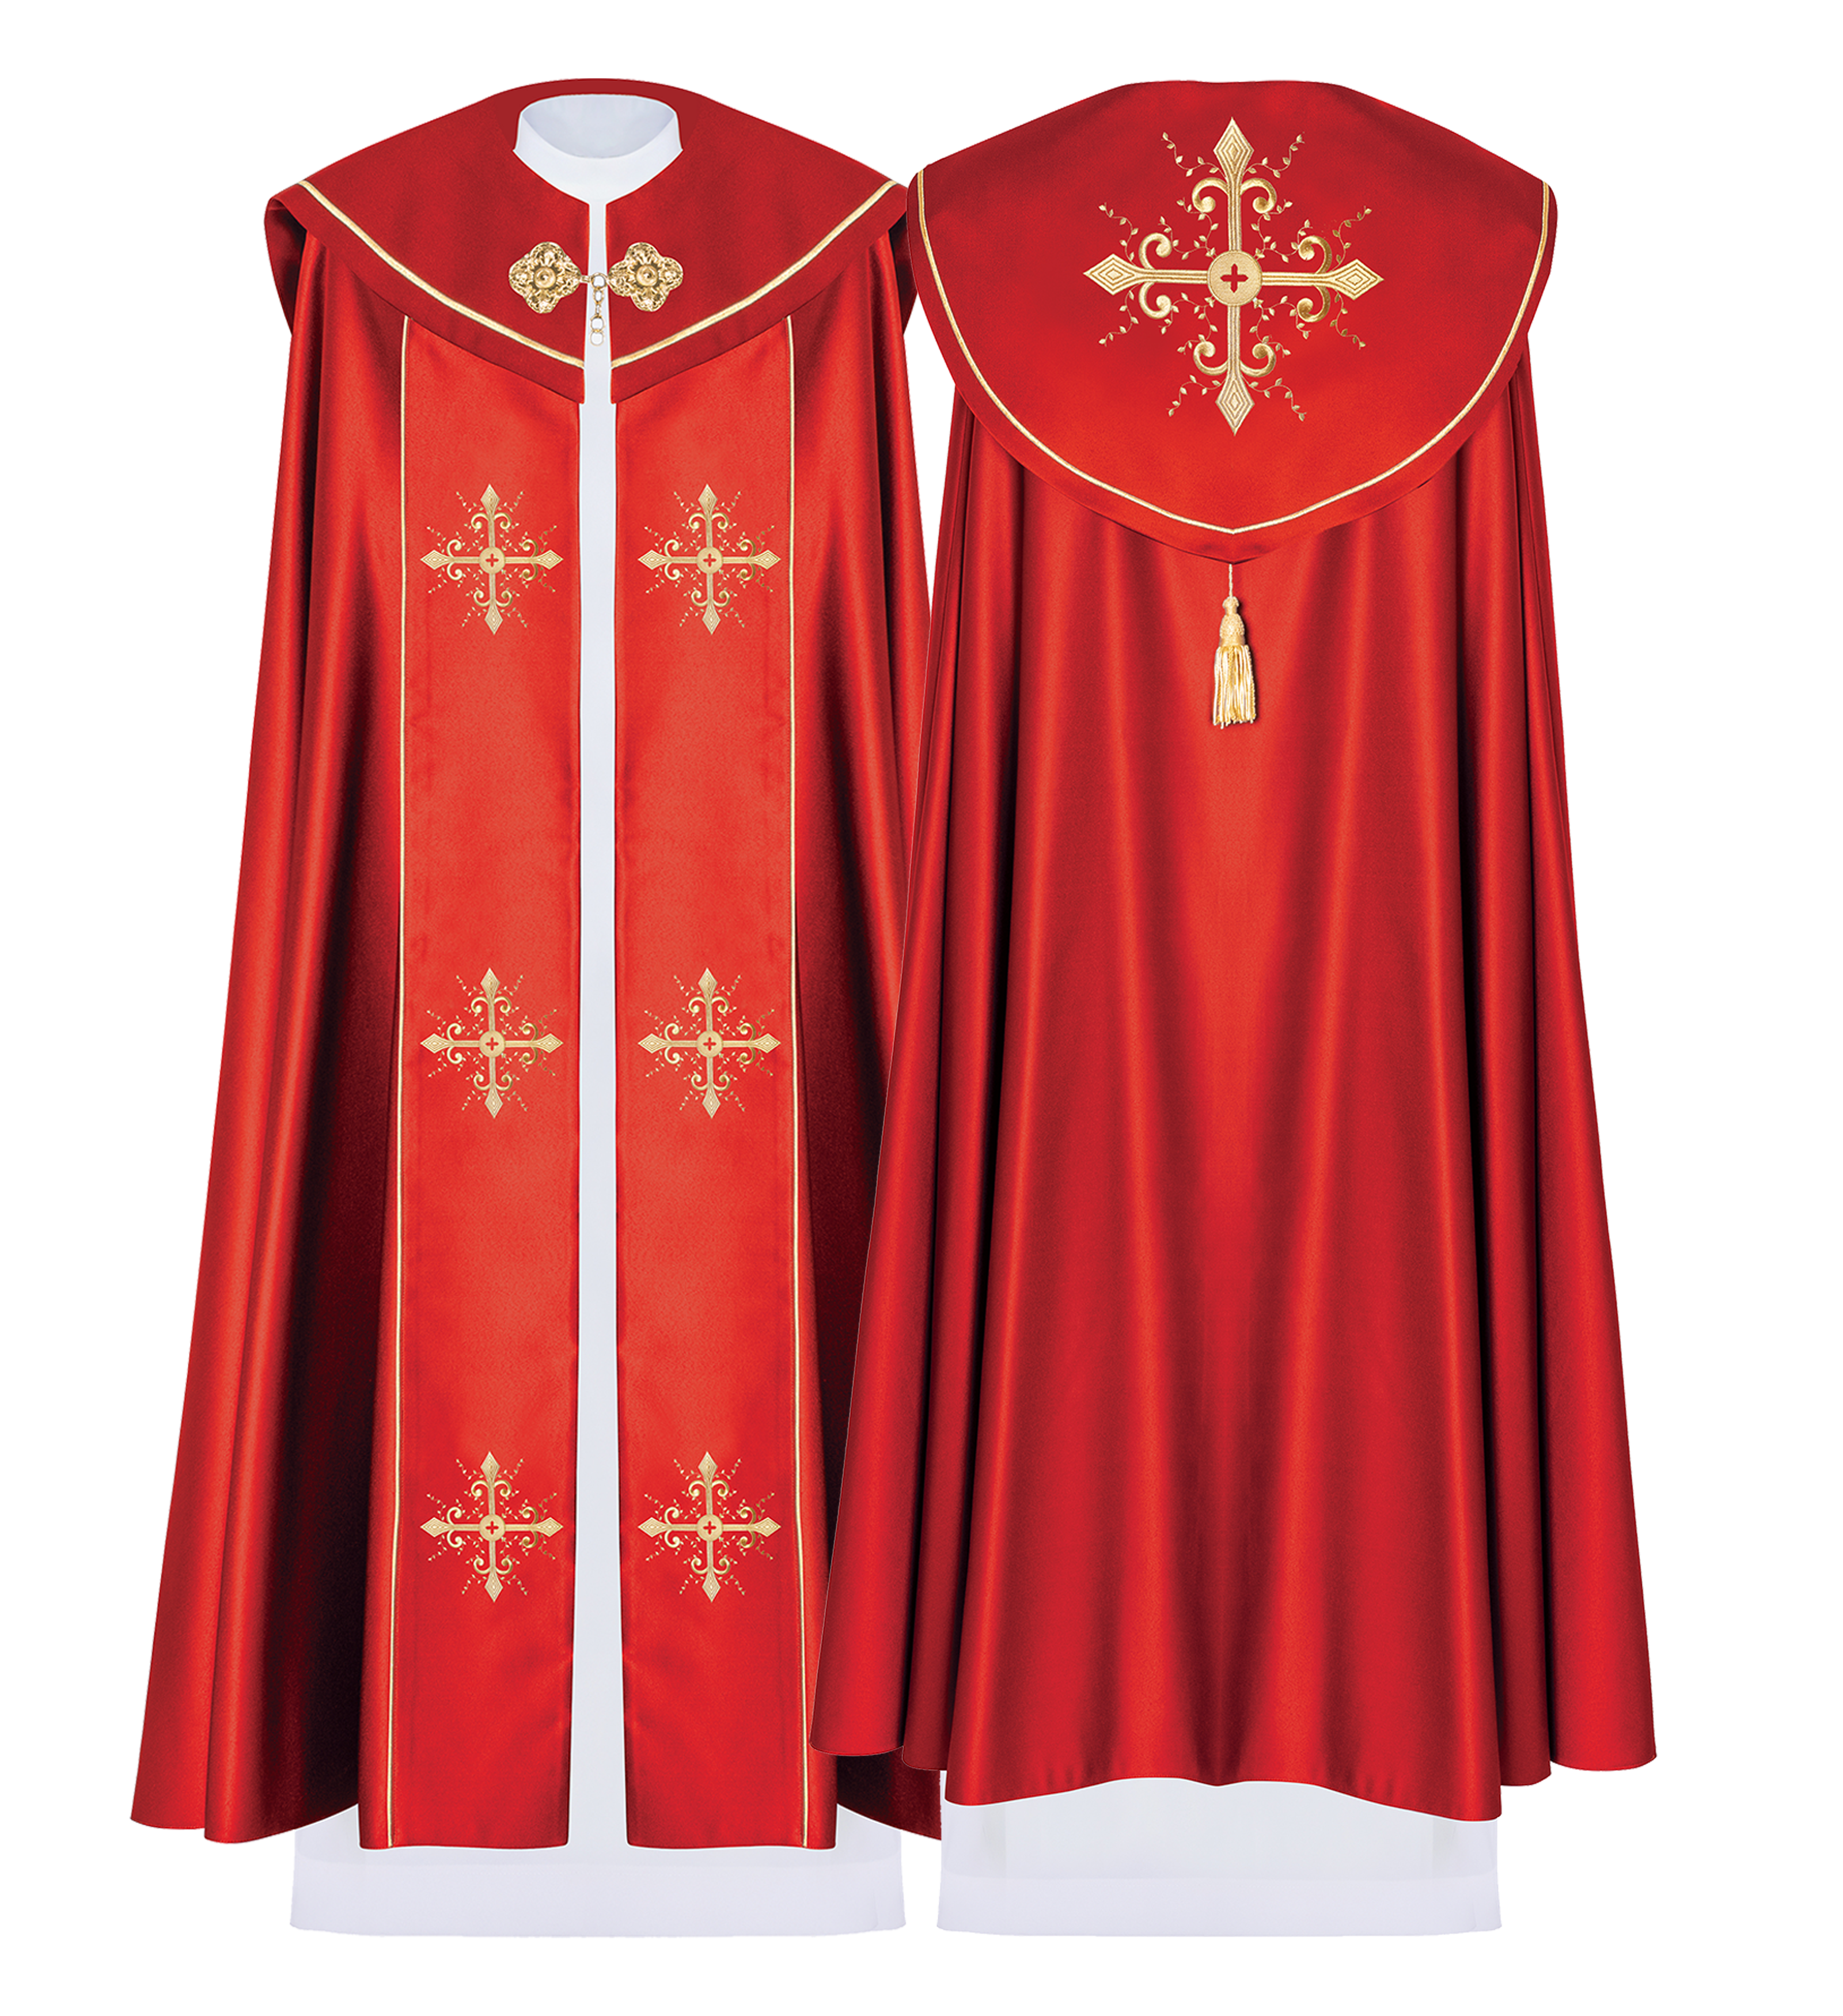 Red liturgical cape with gold crosses embroidery